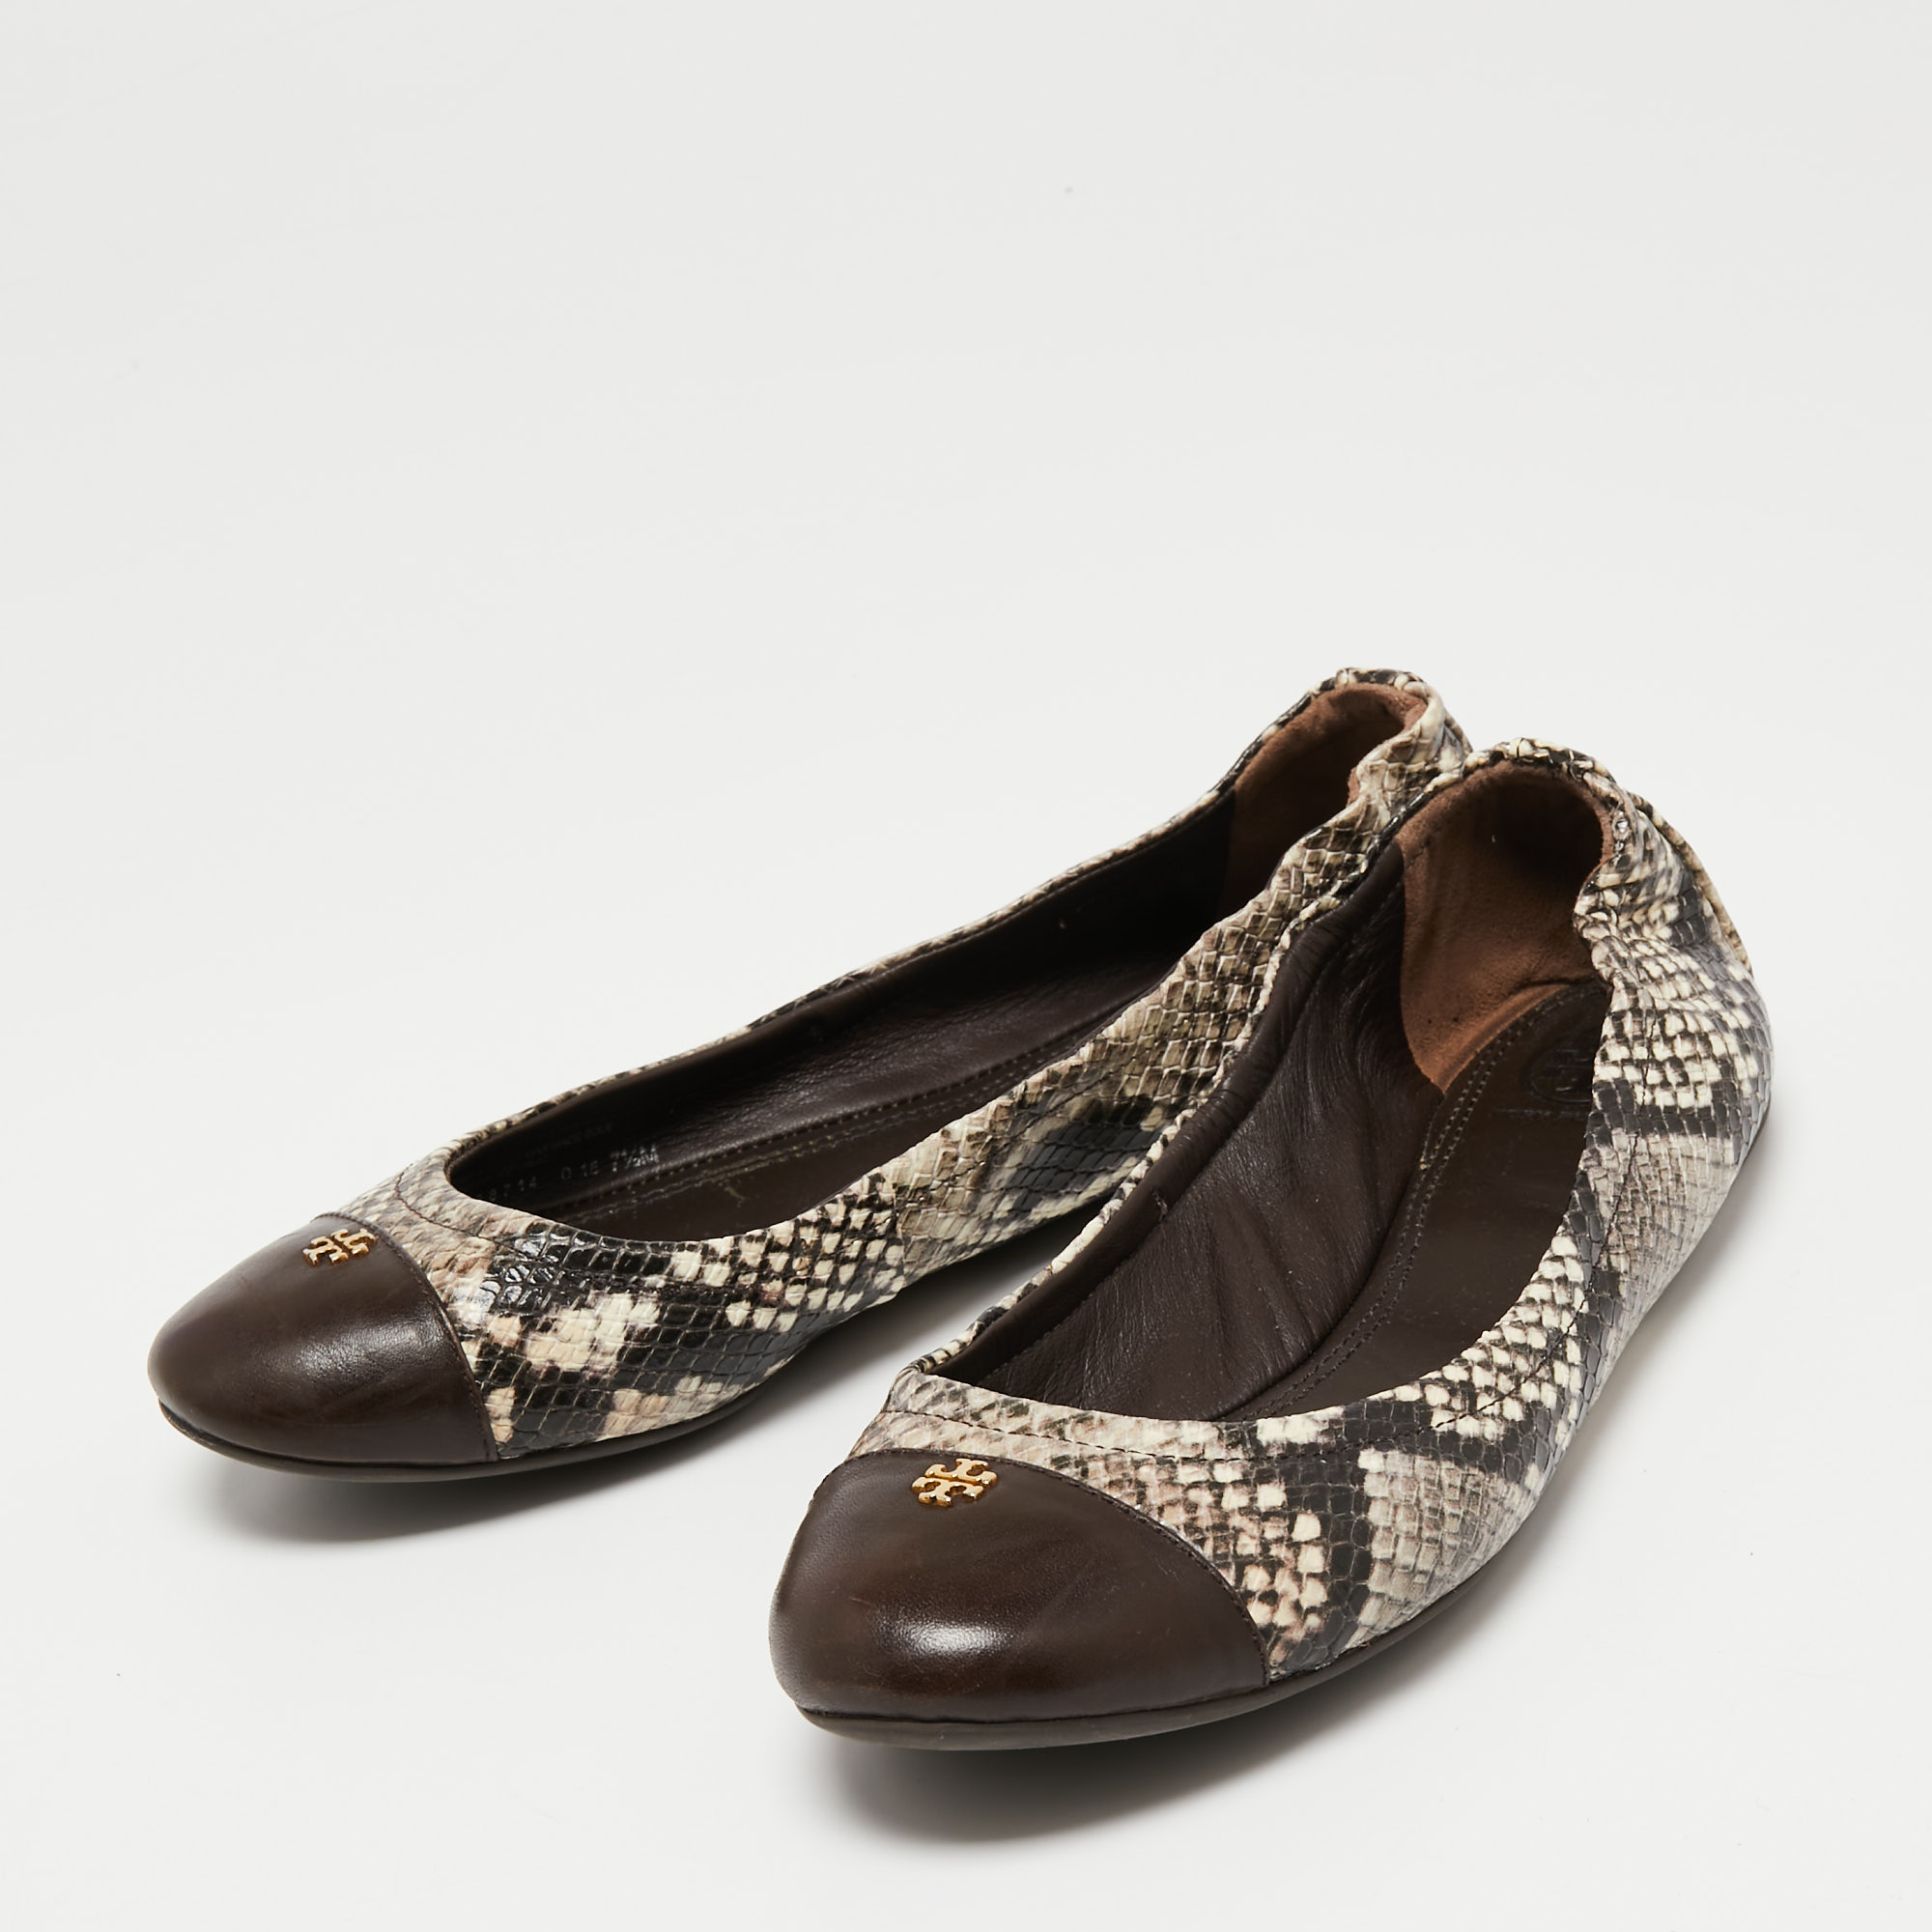 

Tory Burch Tri-Color Snakeskin Embossed Leather Cap Toe Scrunch Ballet Flats Size, Brown